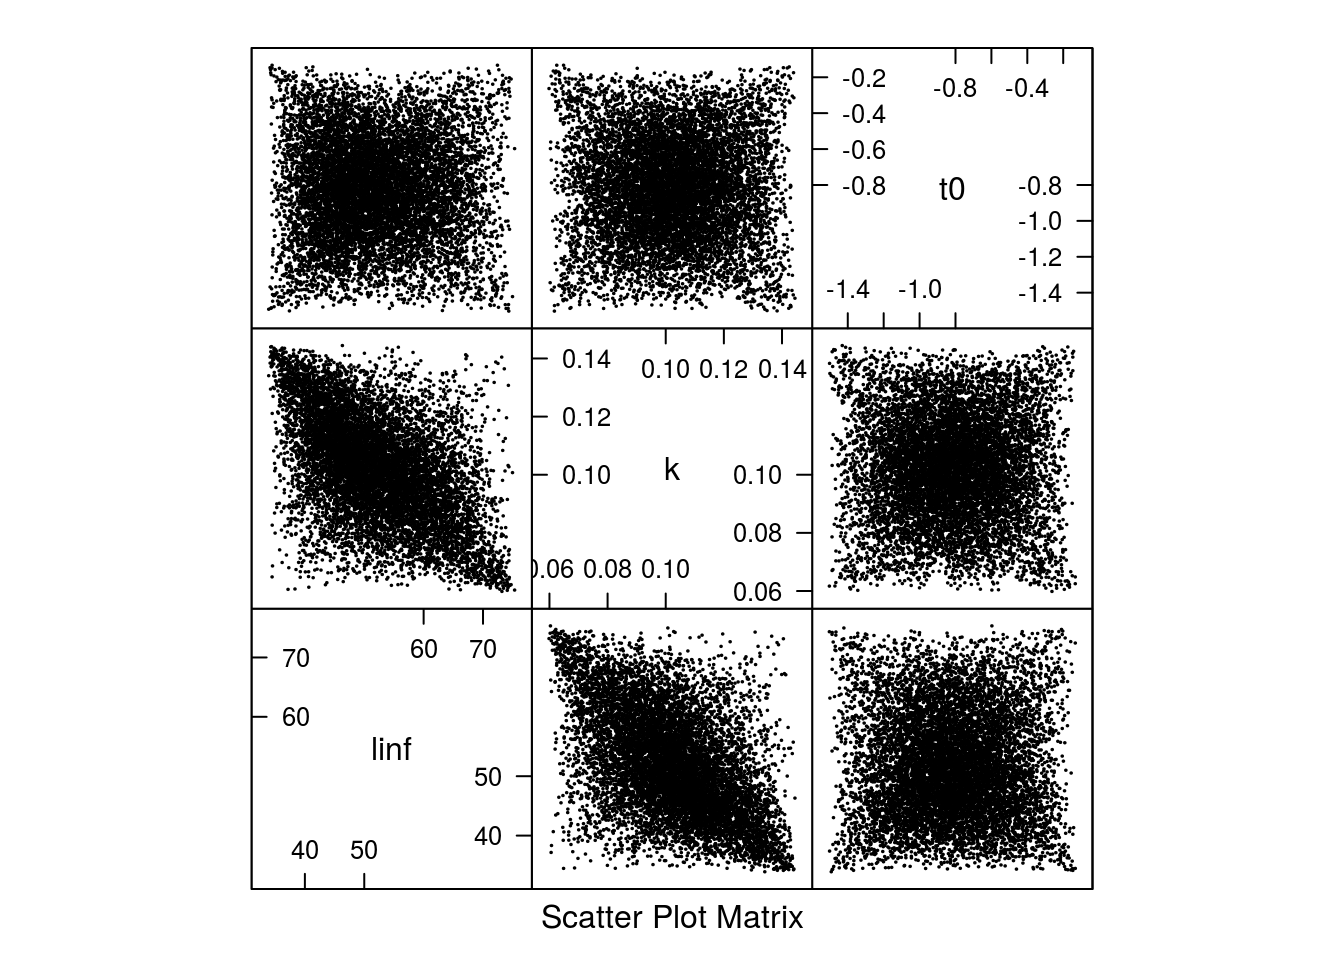 Scatter plot of the 10000 parameter sets from the multivariate triangle distribution.